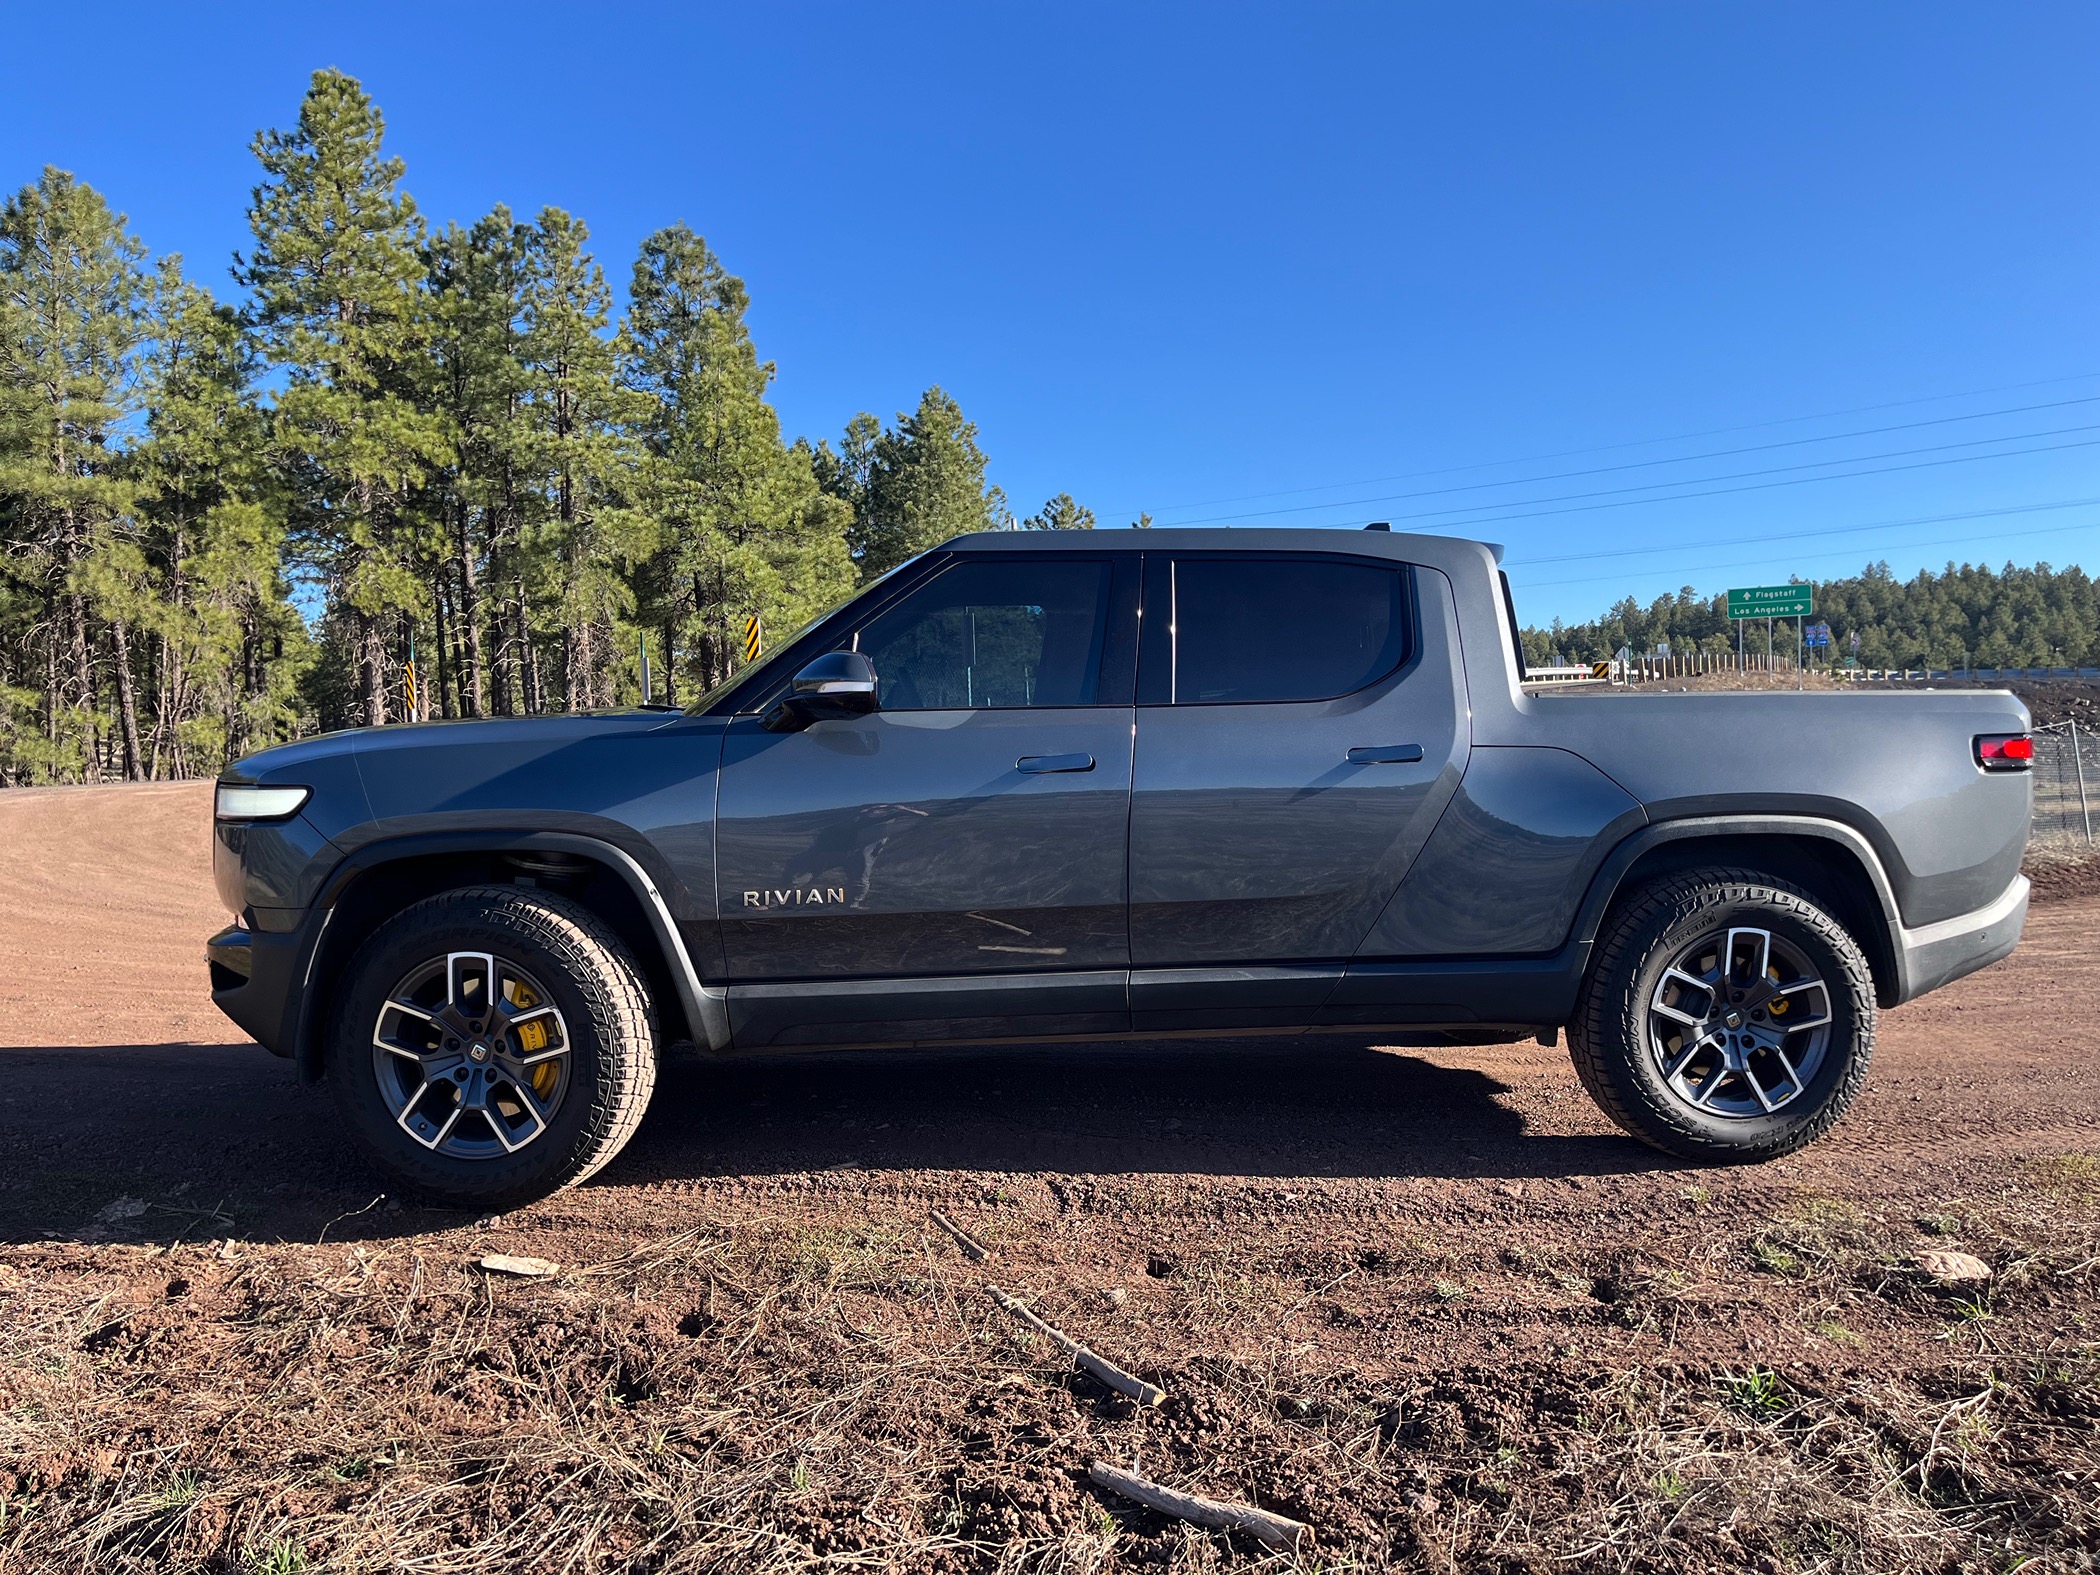 Rivian R1T R1S FOR SALE: 22 R1T LE - El Cap - Quad Motor - Lrg Pack - 20" AT - 39k mi - Off Road Pkg - Lots of Accessories and Aftermarket Upgrades - $60K IMG_6894